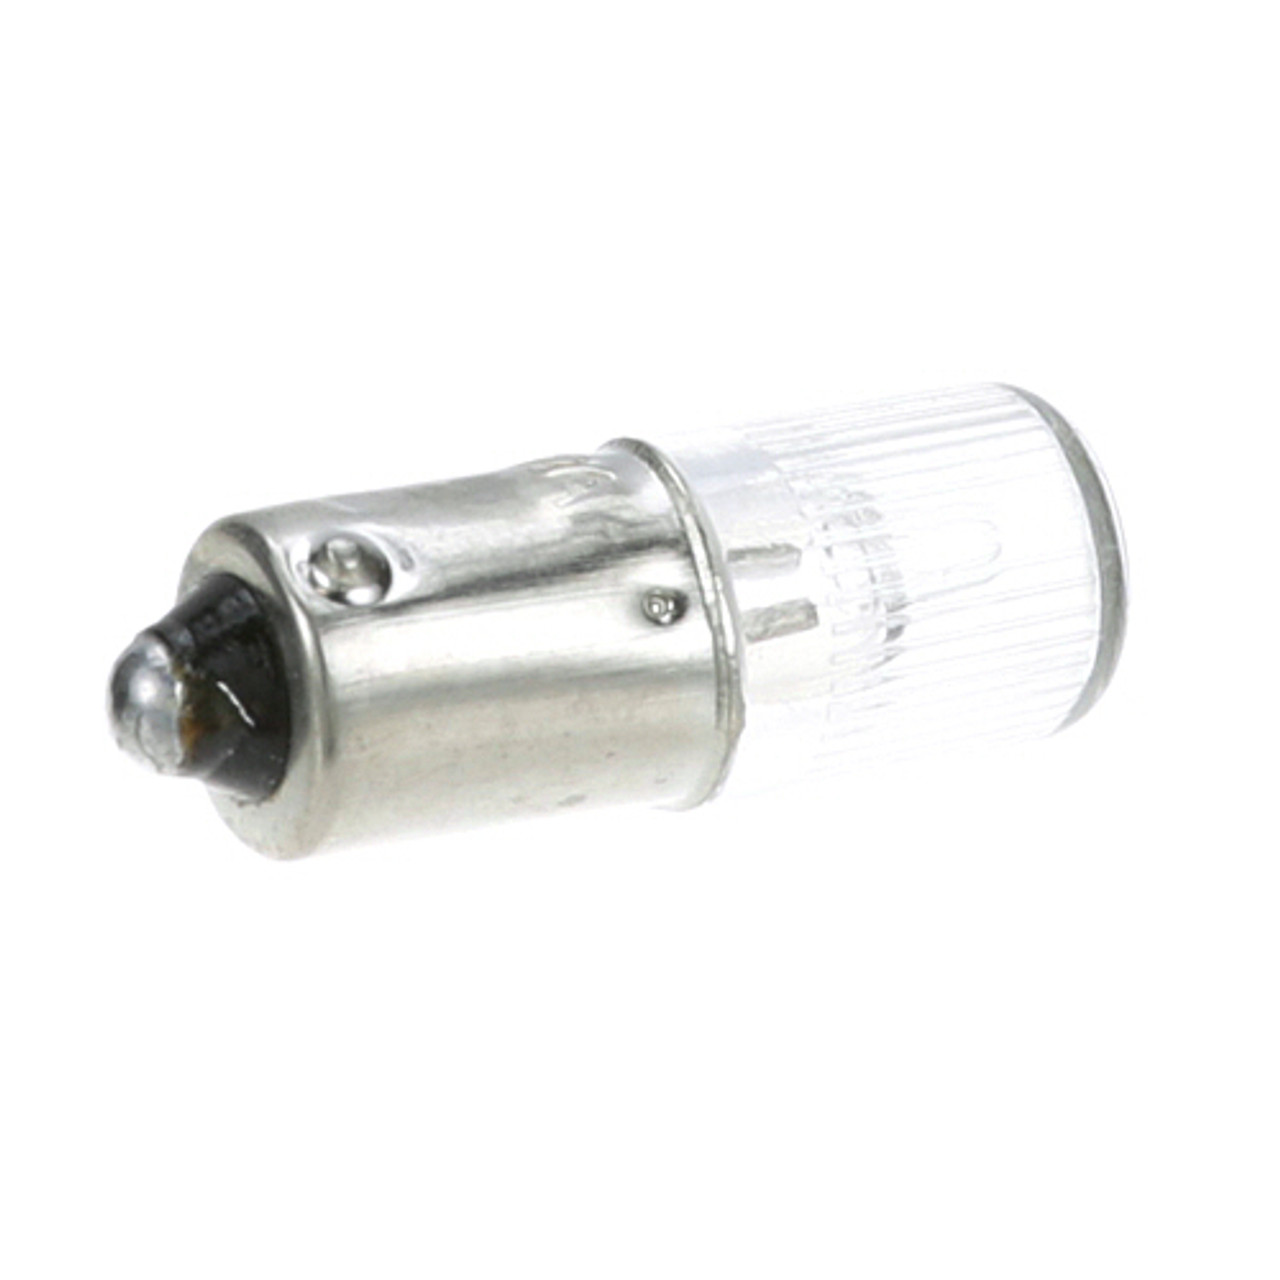 Bulb Only Clear 250V - Replacement Part For Vulcan Hart 417809-1